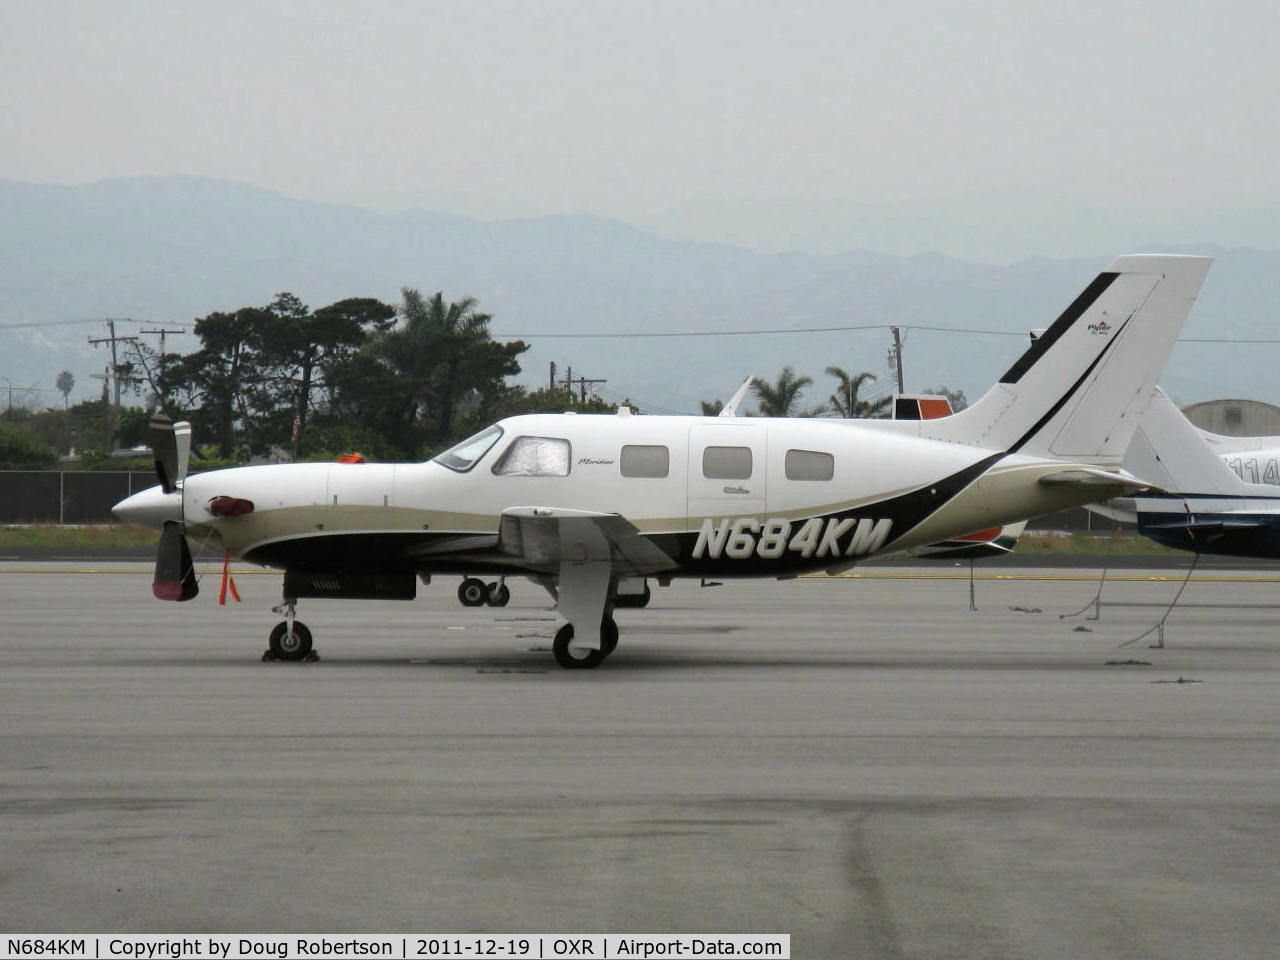 N684KM, 2008 Piper PA-46-500TP C/N 4697353, 2008 Piper PA-46-500TP MALIBU MERIDIAN, one P&W(C)PT6A-42A Turboprop 1,029 shp flat rated at 500 shp maximum continuous. Four blade CS Hartzell reversible pitch prop. Pressurized.